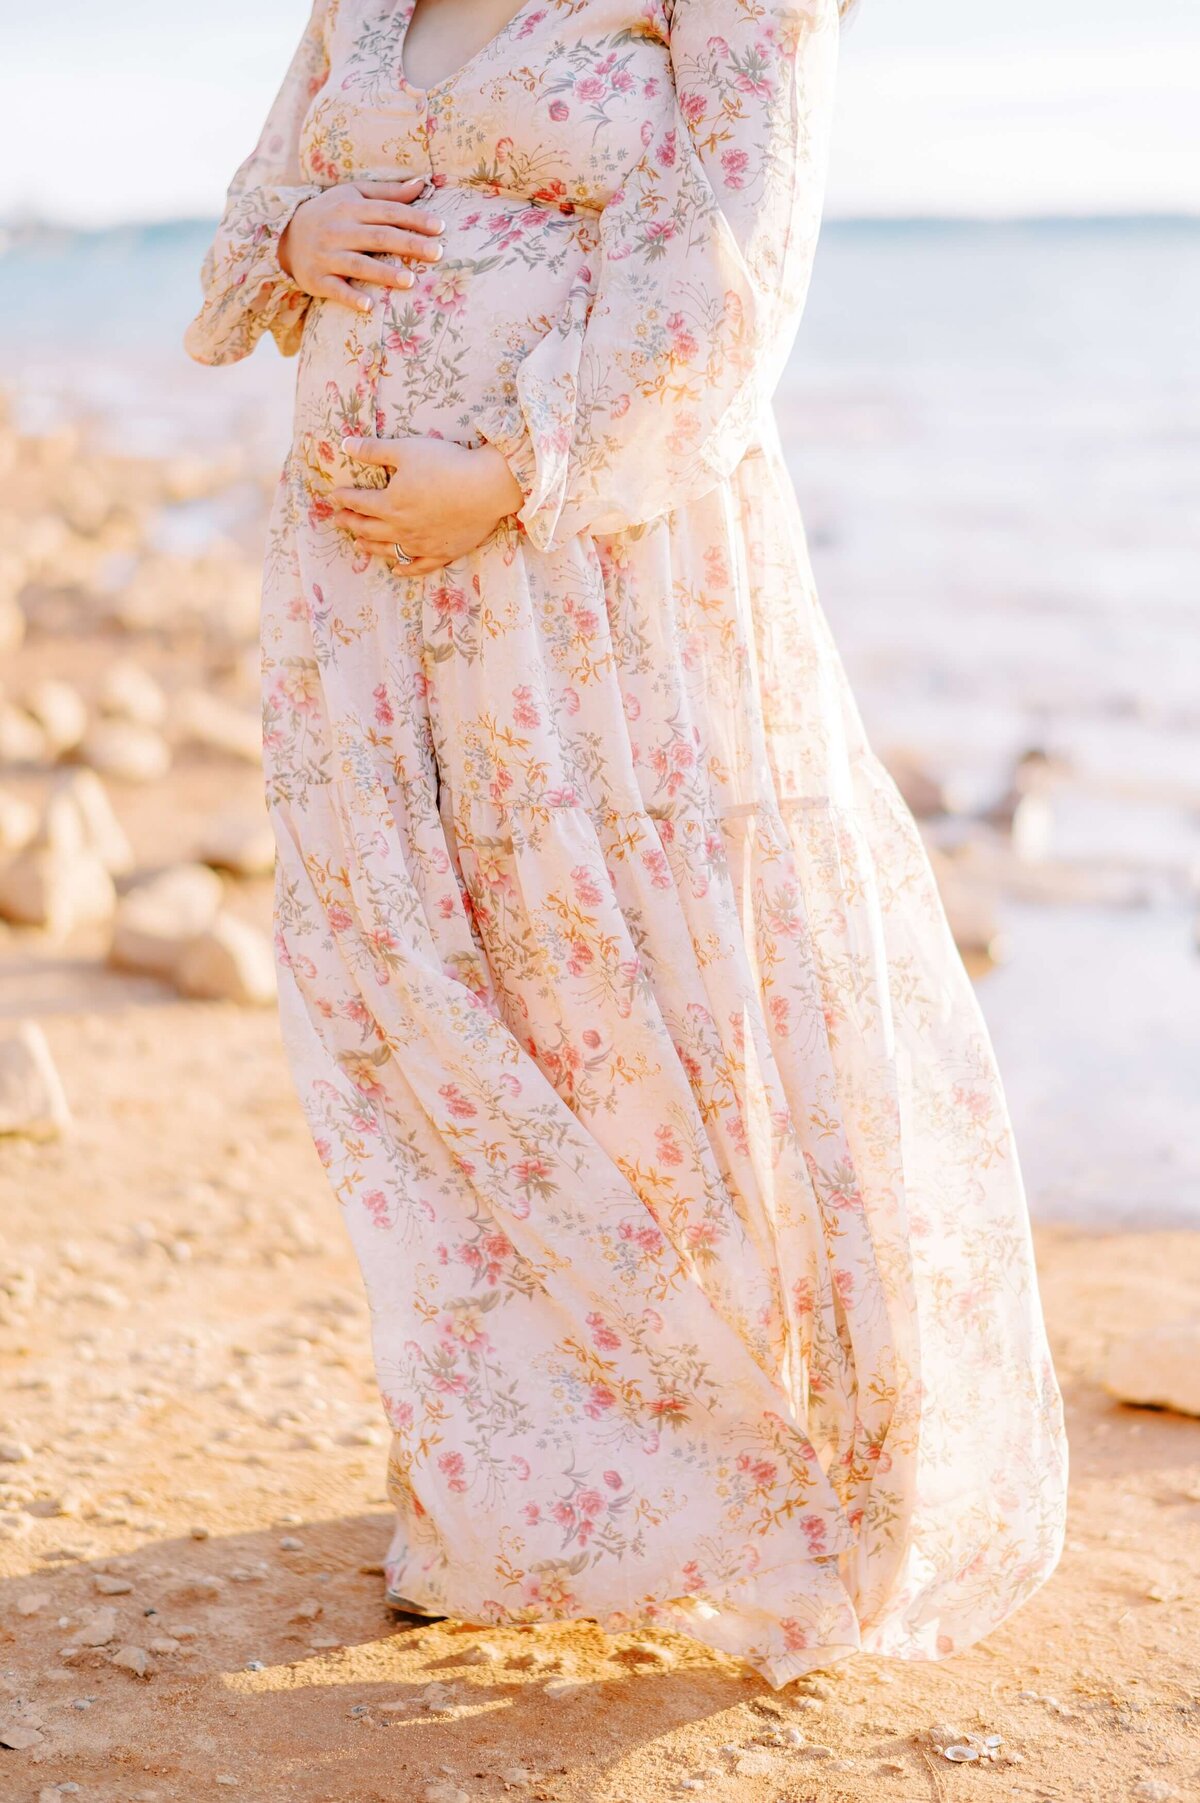 A baby jump is sweetly displayed in a pink floral dress blowing in the wind on a beach.